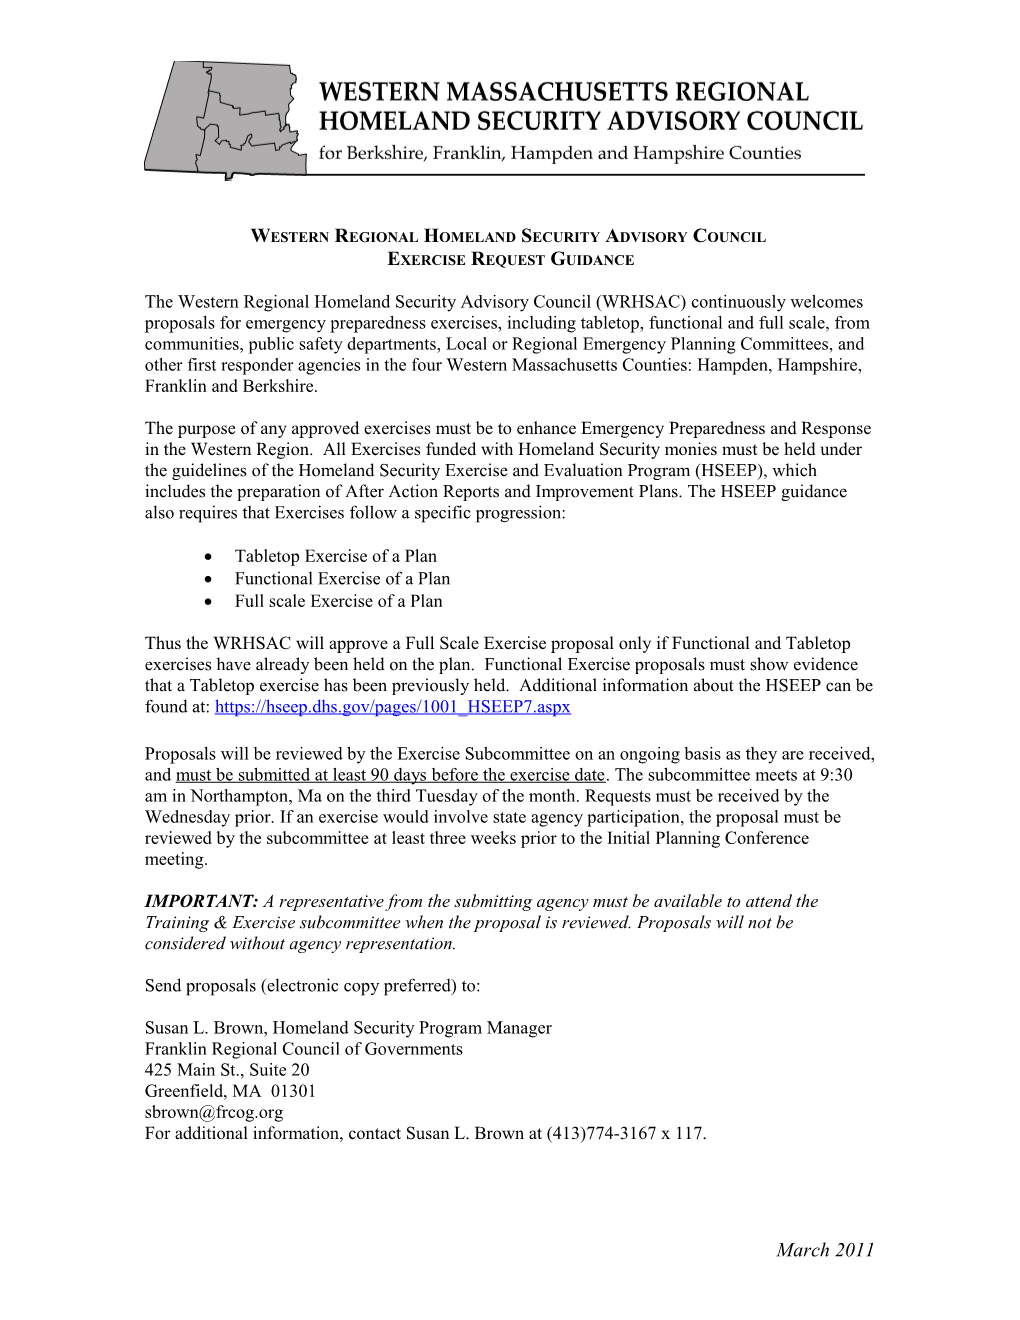 The Western Region Homeland Security Advisory Council (WRHSAC) Invites Proposals for Emergency